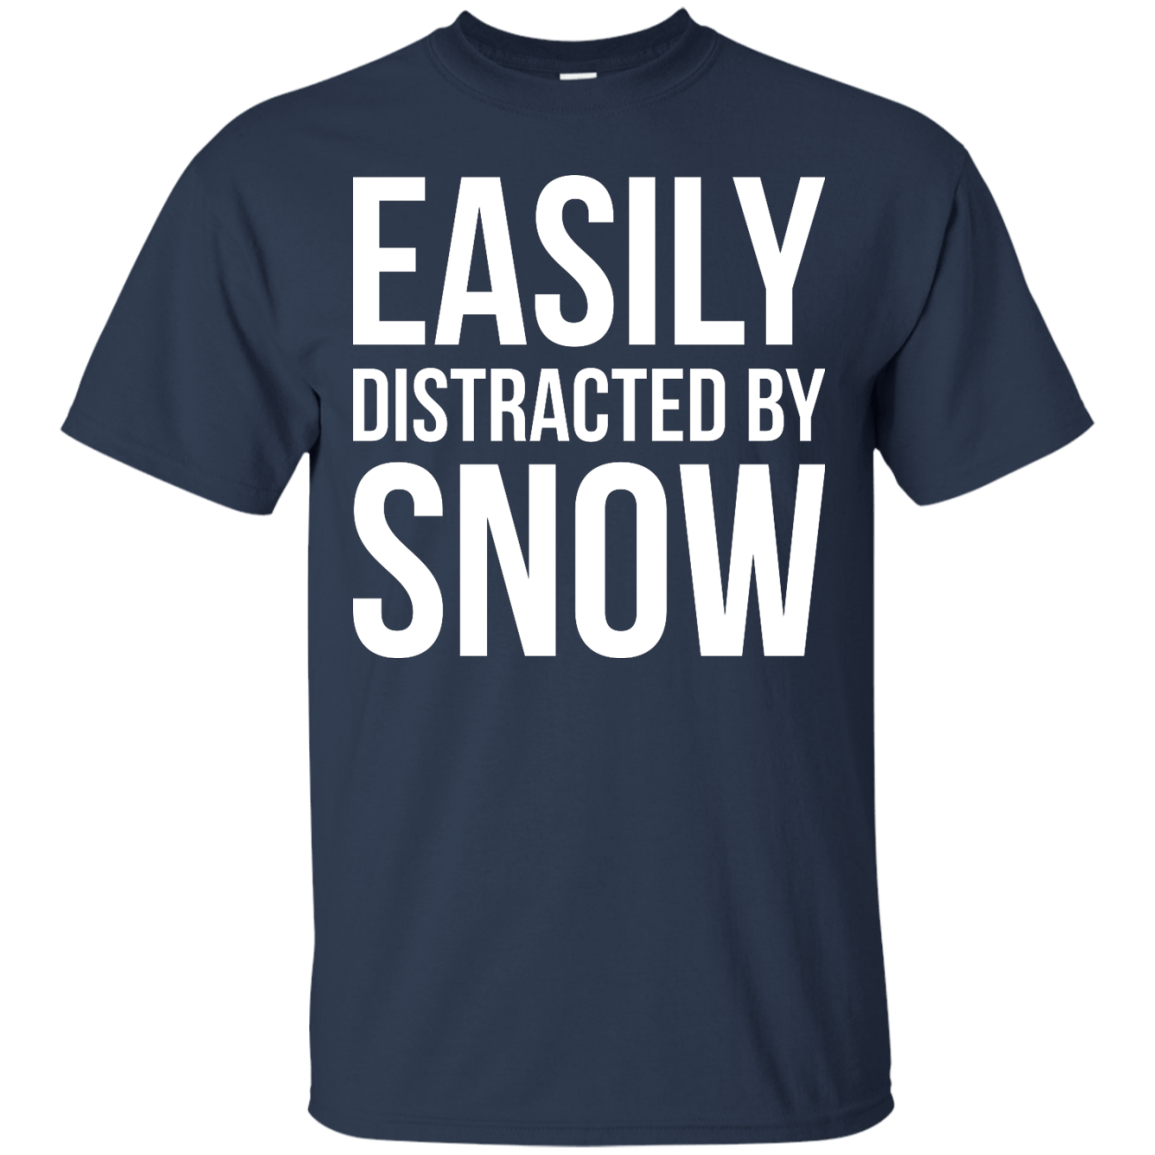 Easily Distracted By Snow Tees - Powderaddicts